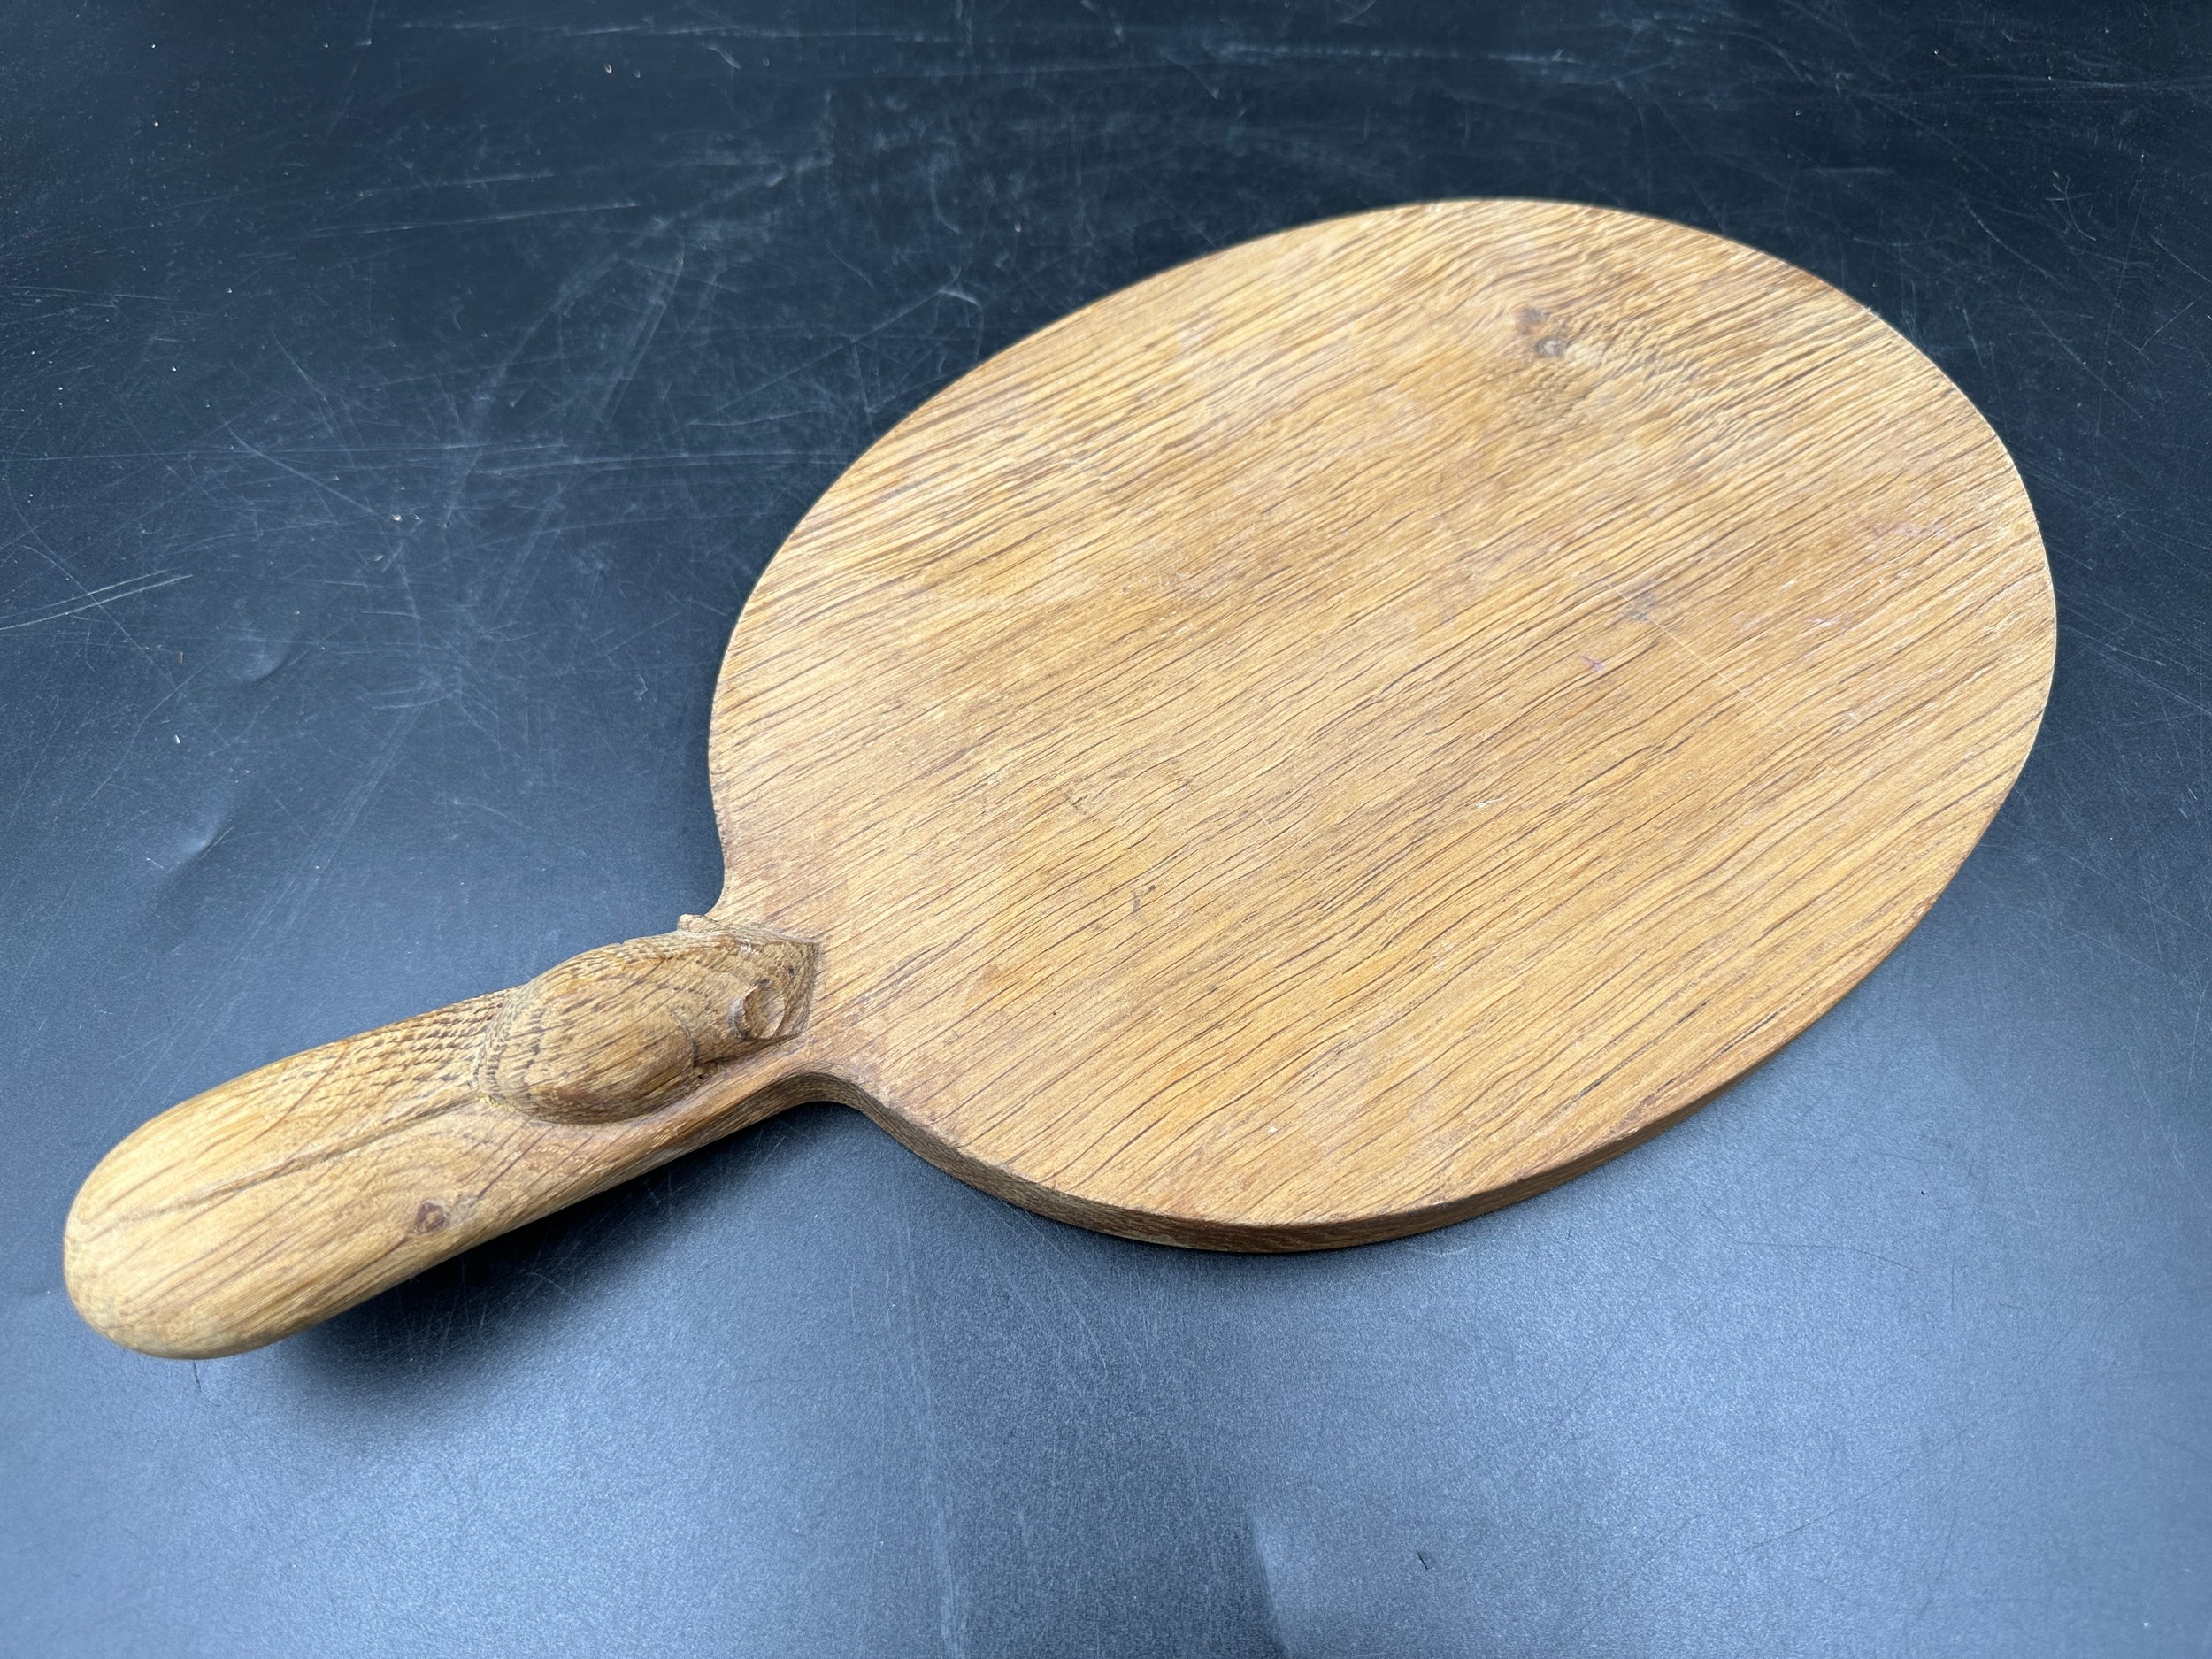 Robert Thompson 'Mouseman' of Kilburn, an adzed oak cheese board of oval form with a carved mouse